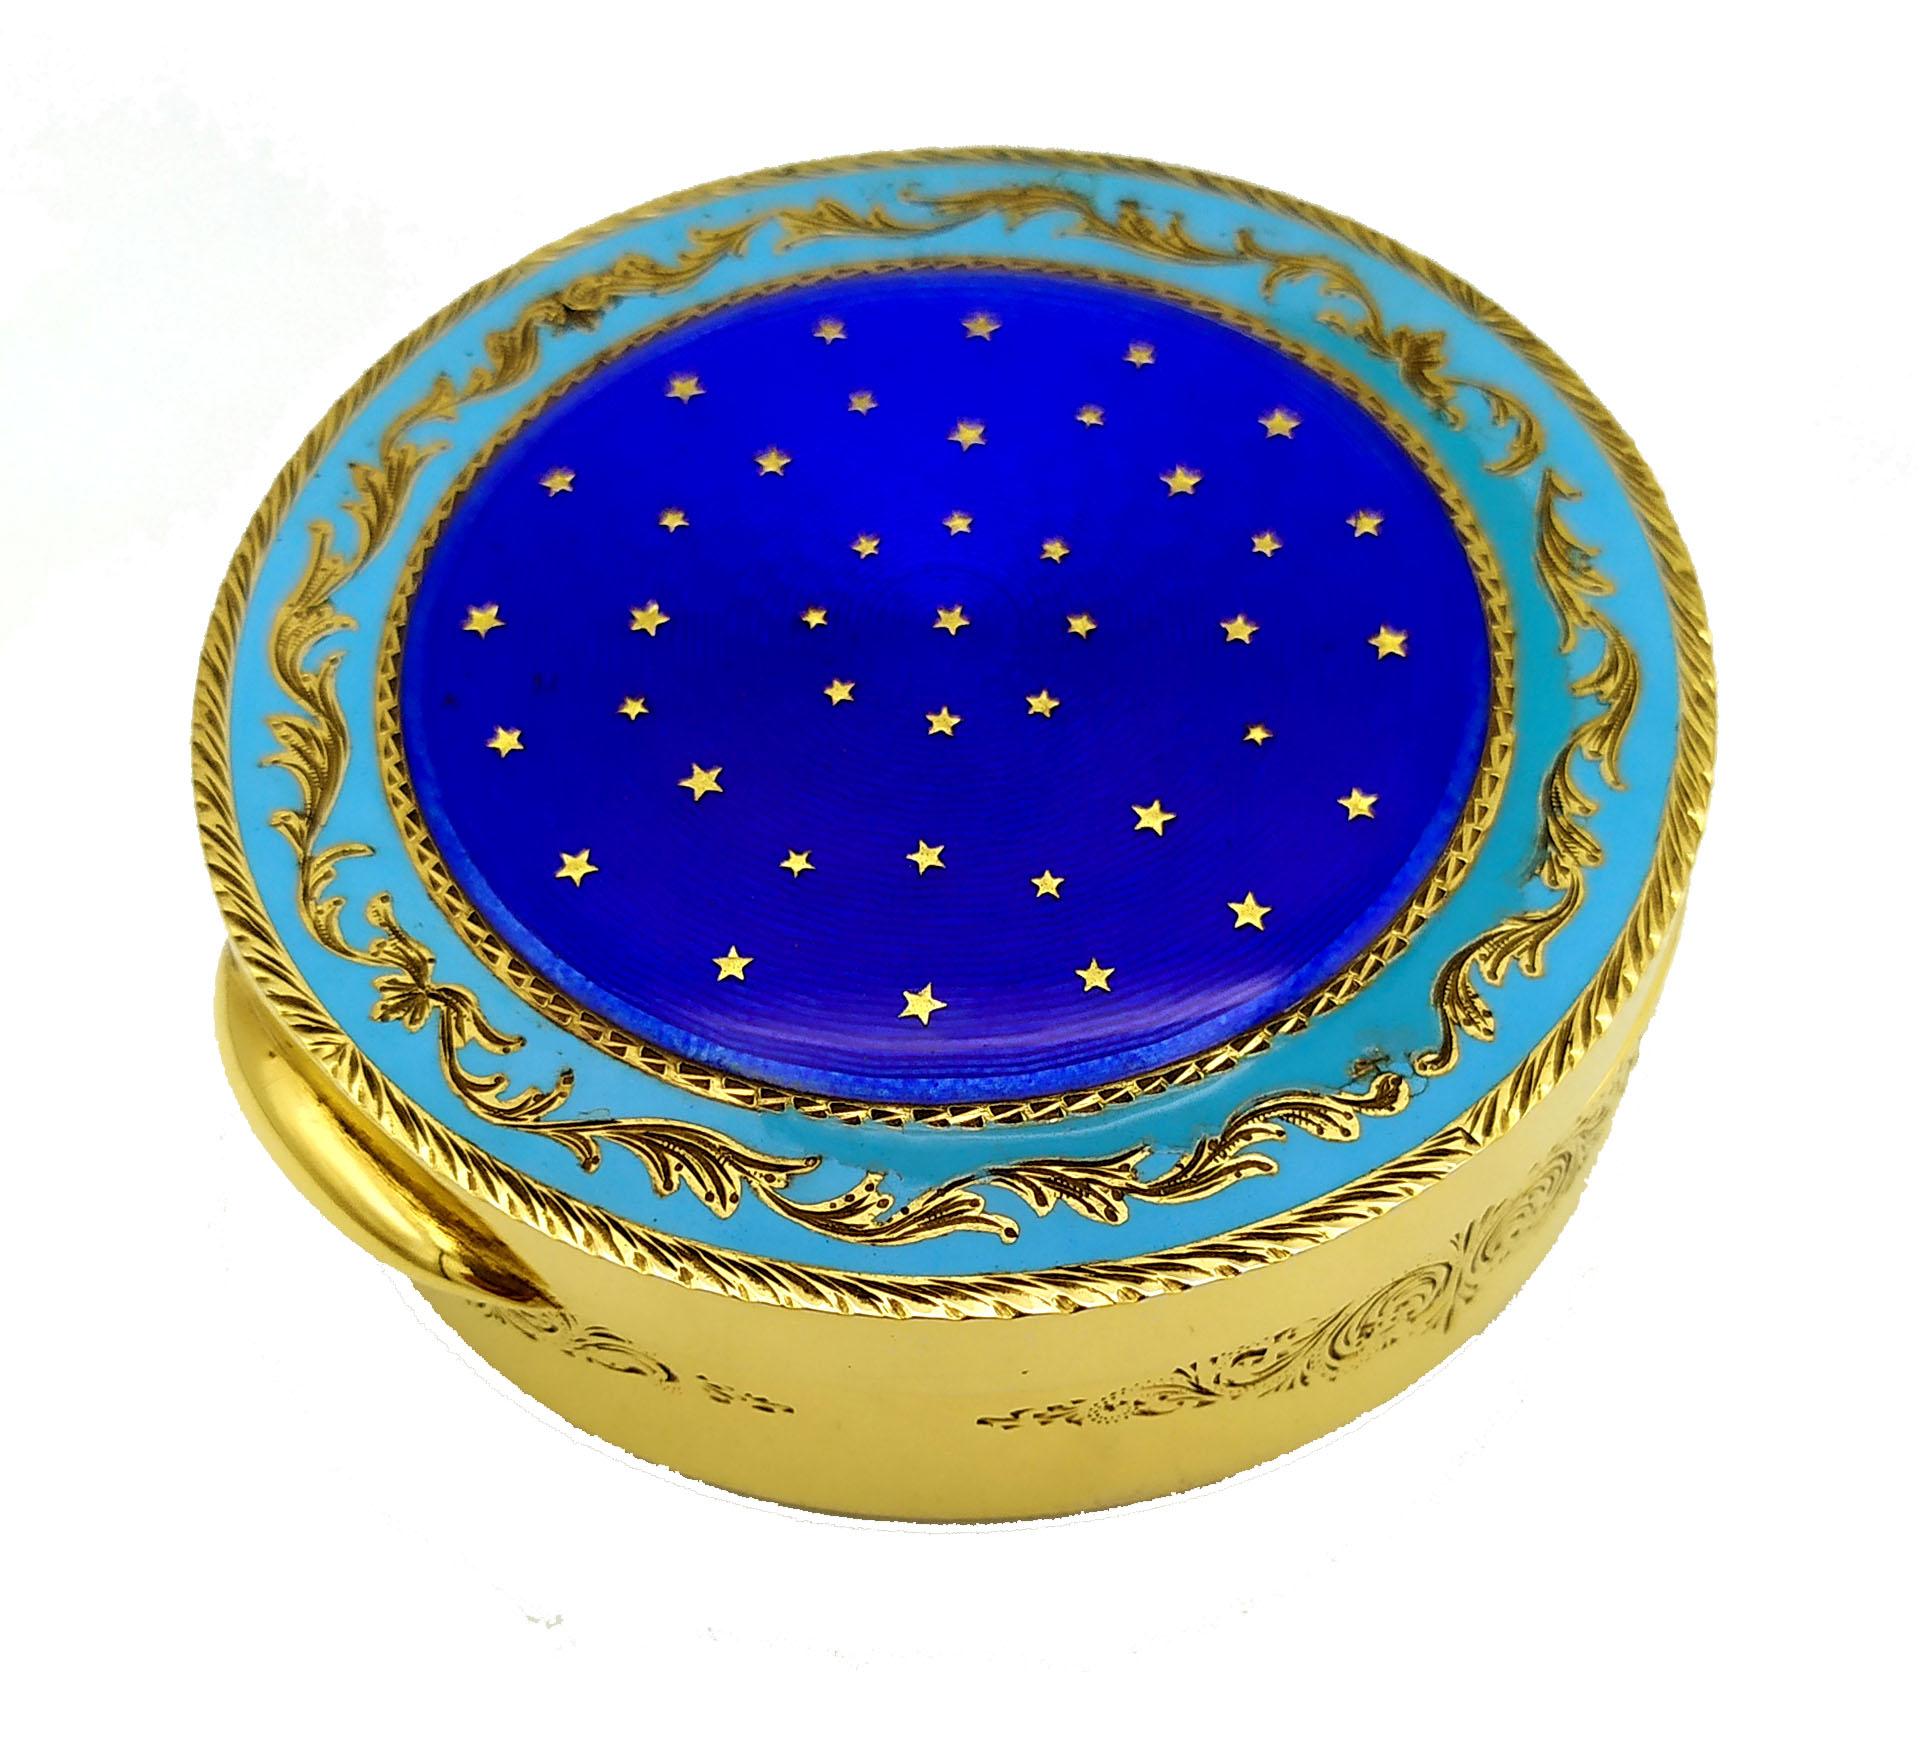 Round table snuffbox in 925/1000 sterling silver gold plated with translucent blue fired enamel on guillochè and with the insertion of pure gold “paillons” in the shape of stars to create a starry sky effect. With turquoise enamel circle with